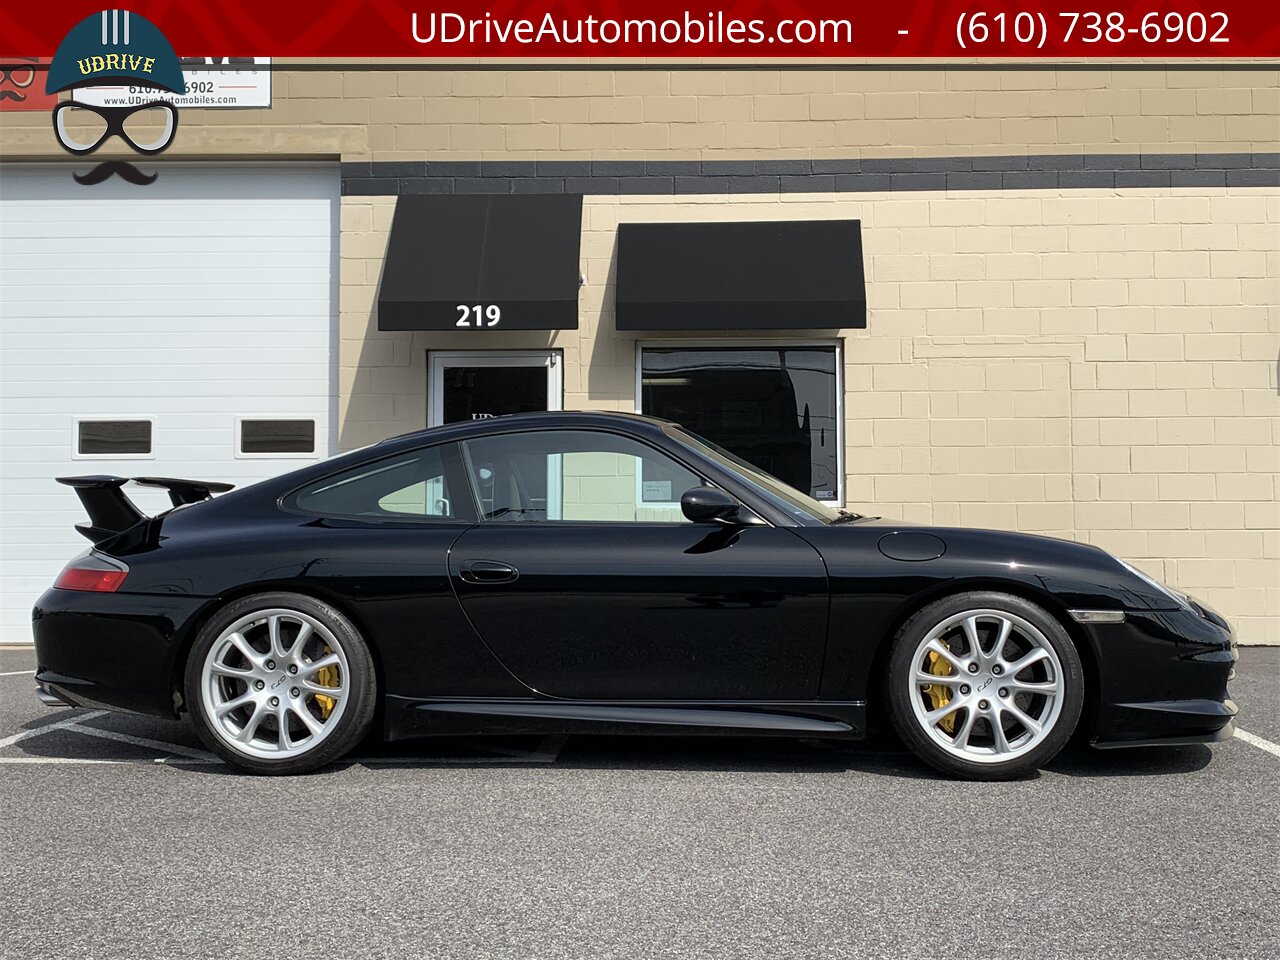 2004 Porsche 911 GT3 996 PCCB Sport Seats Red Stitching $118k MSRP   - Photo 5 - West Chester, PA 19382